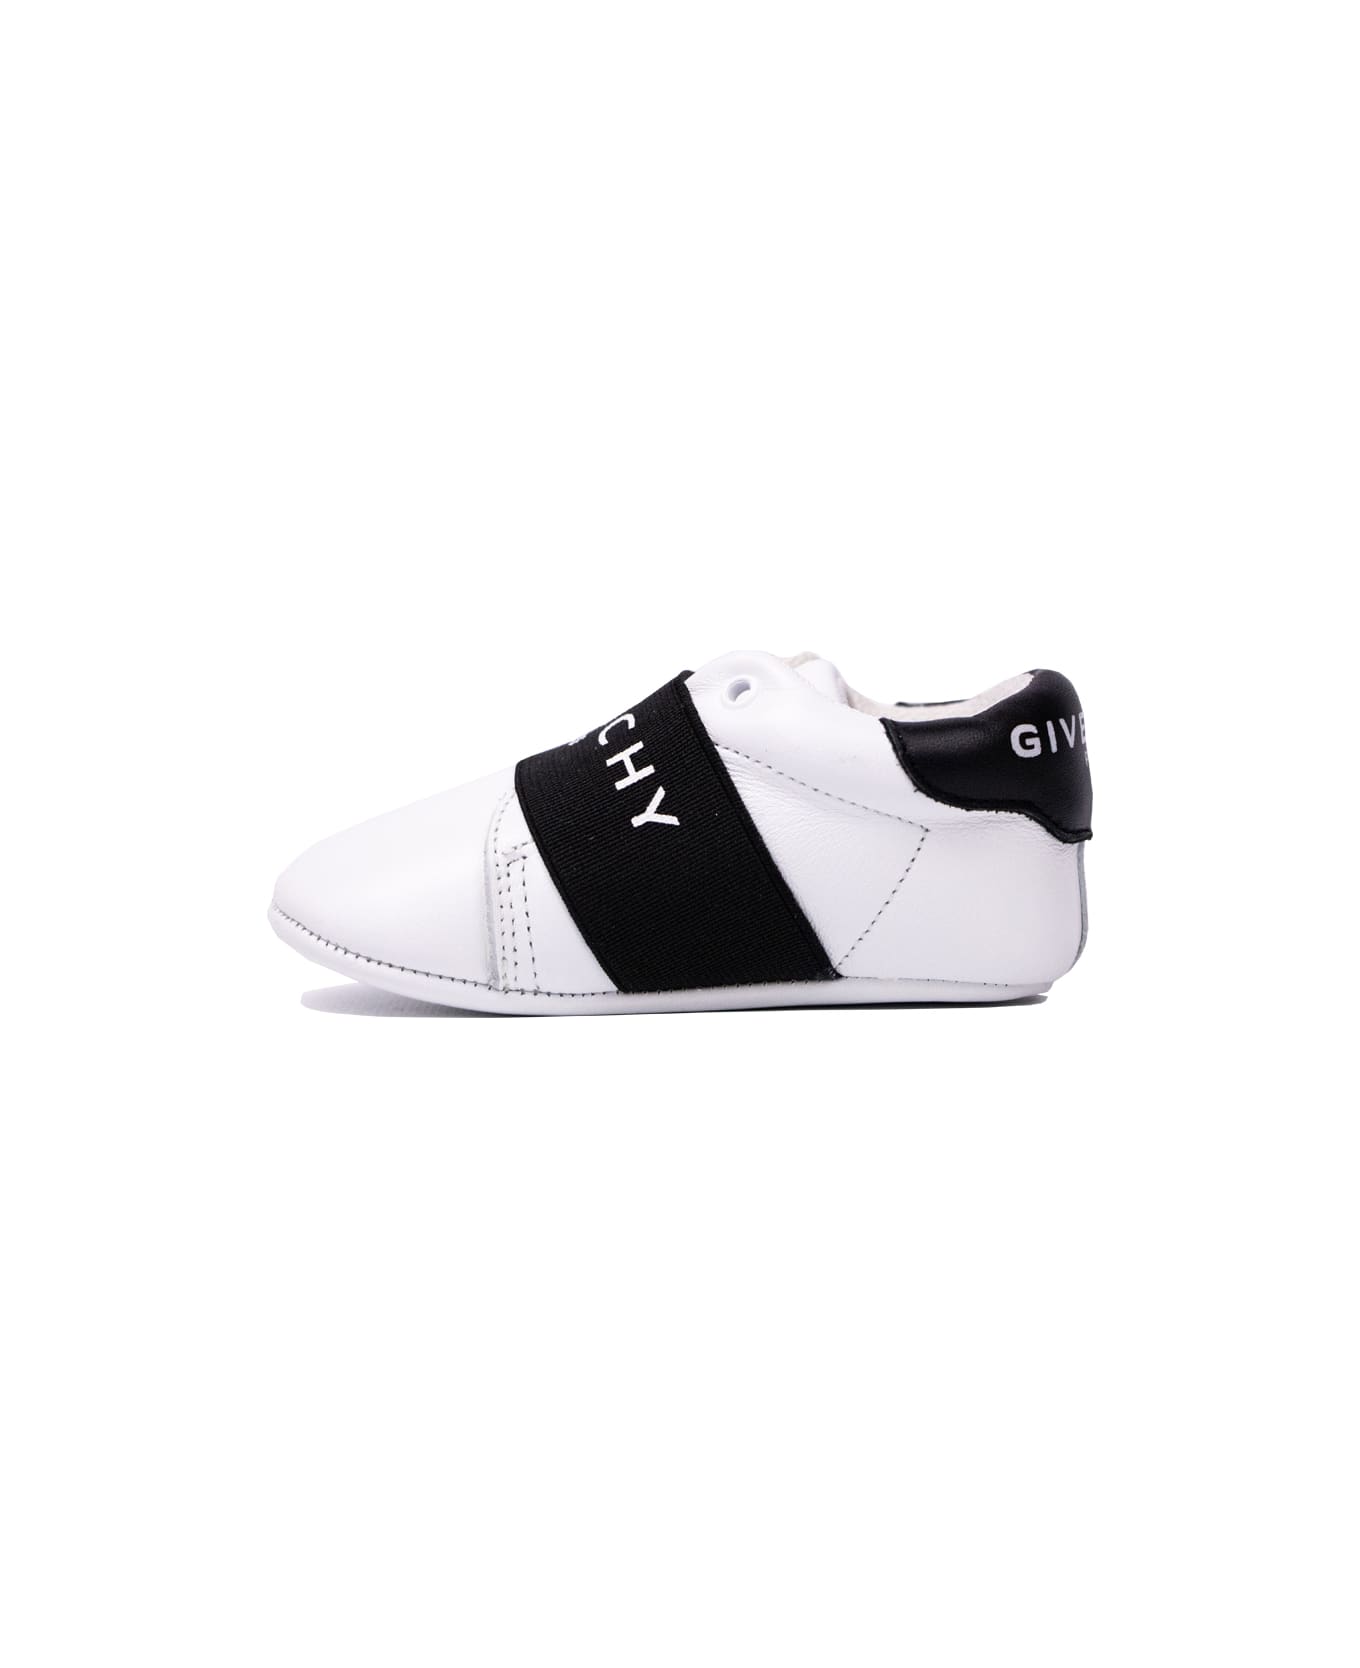 Givenchy Cradle Sneakers - White